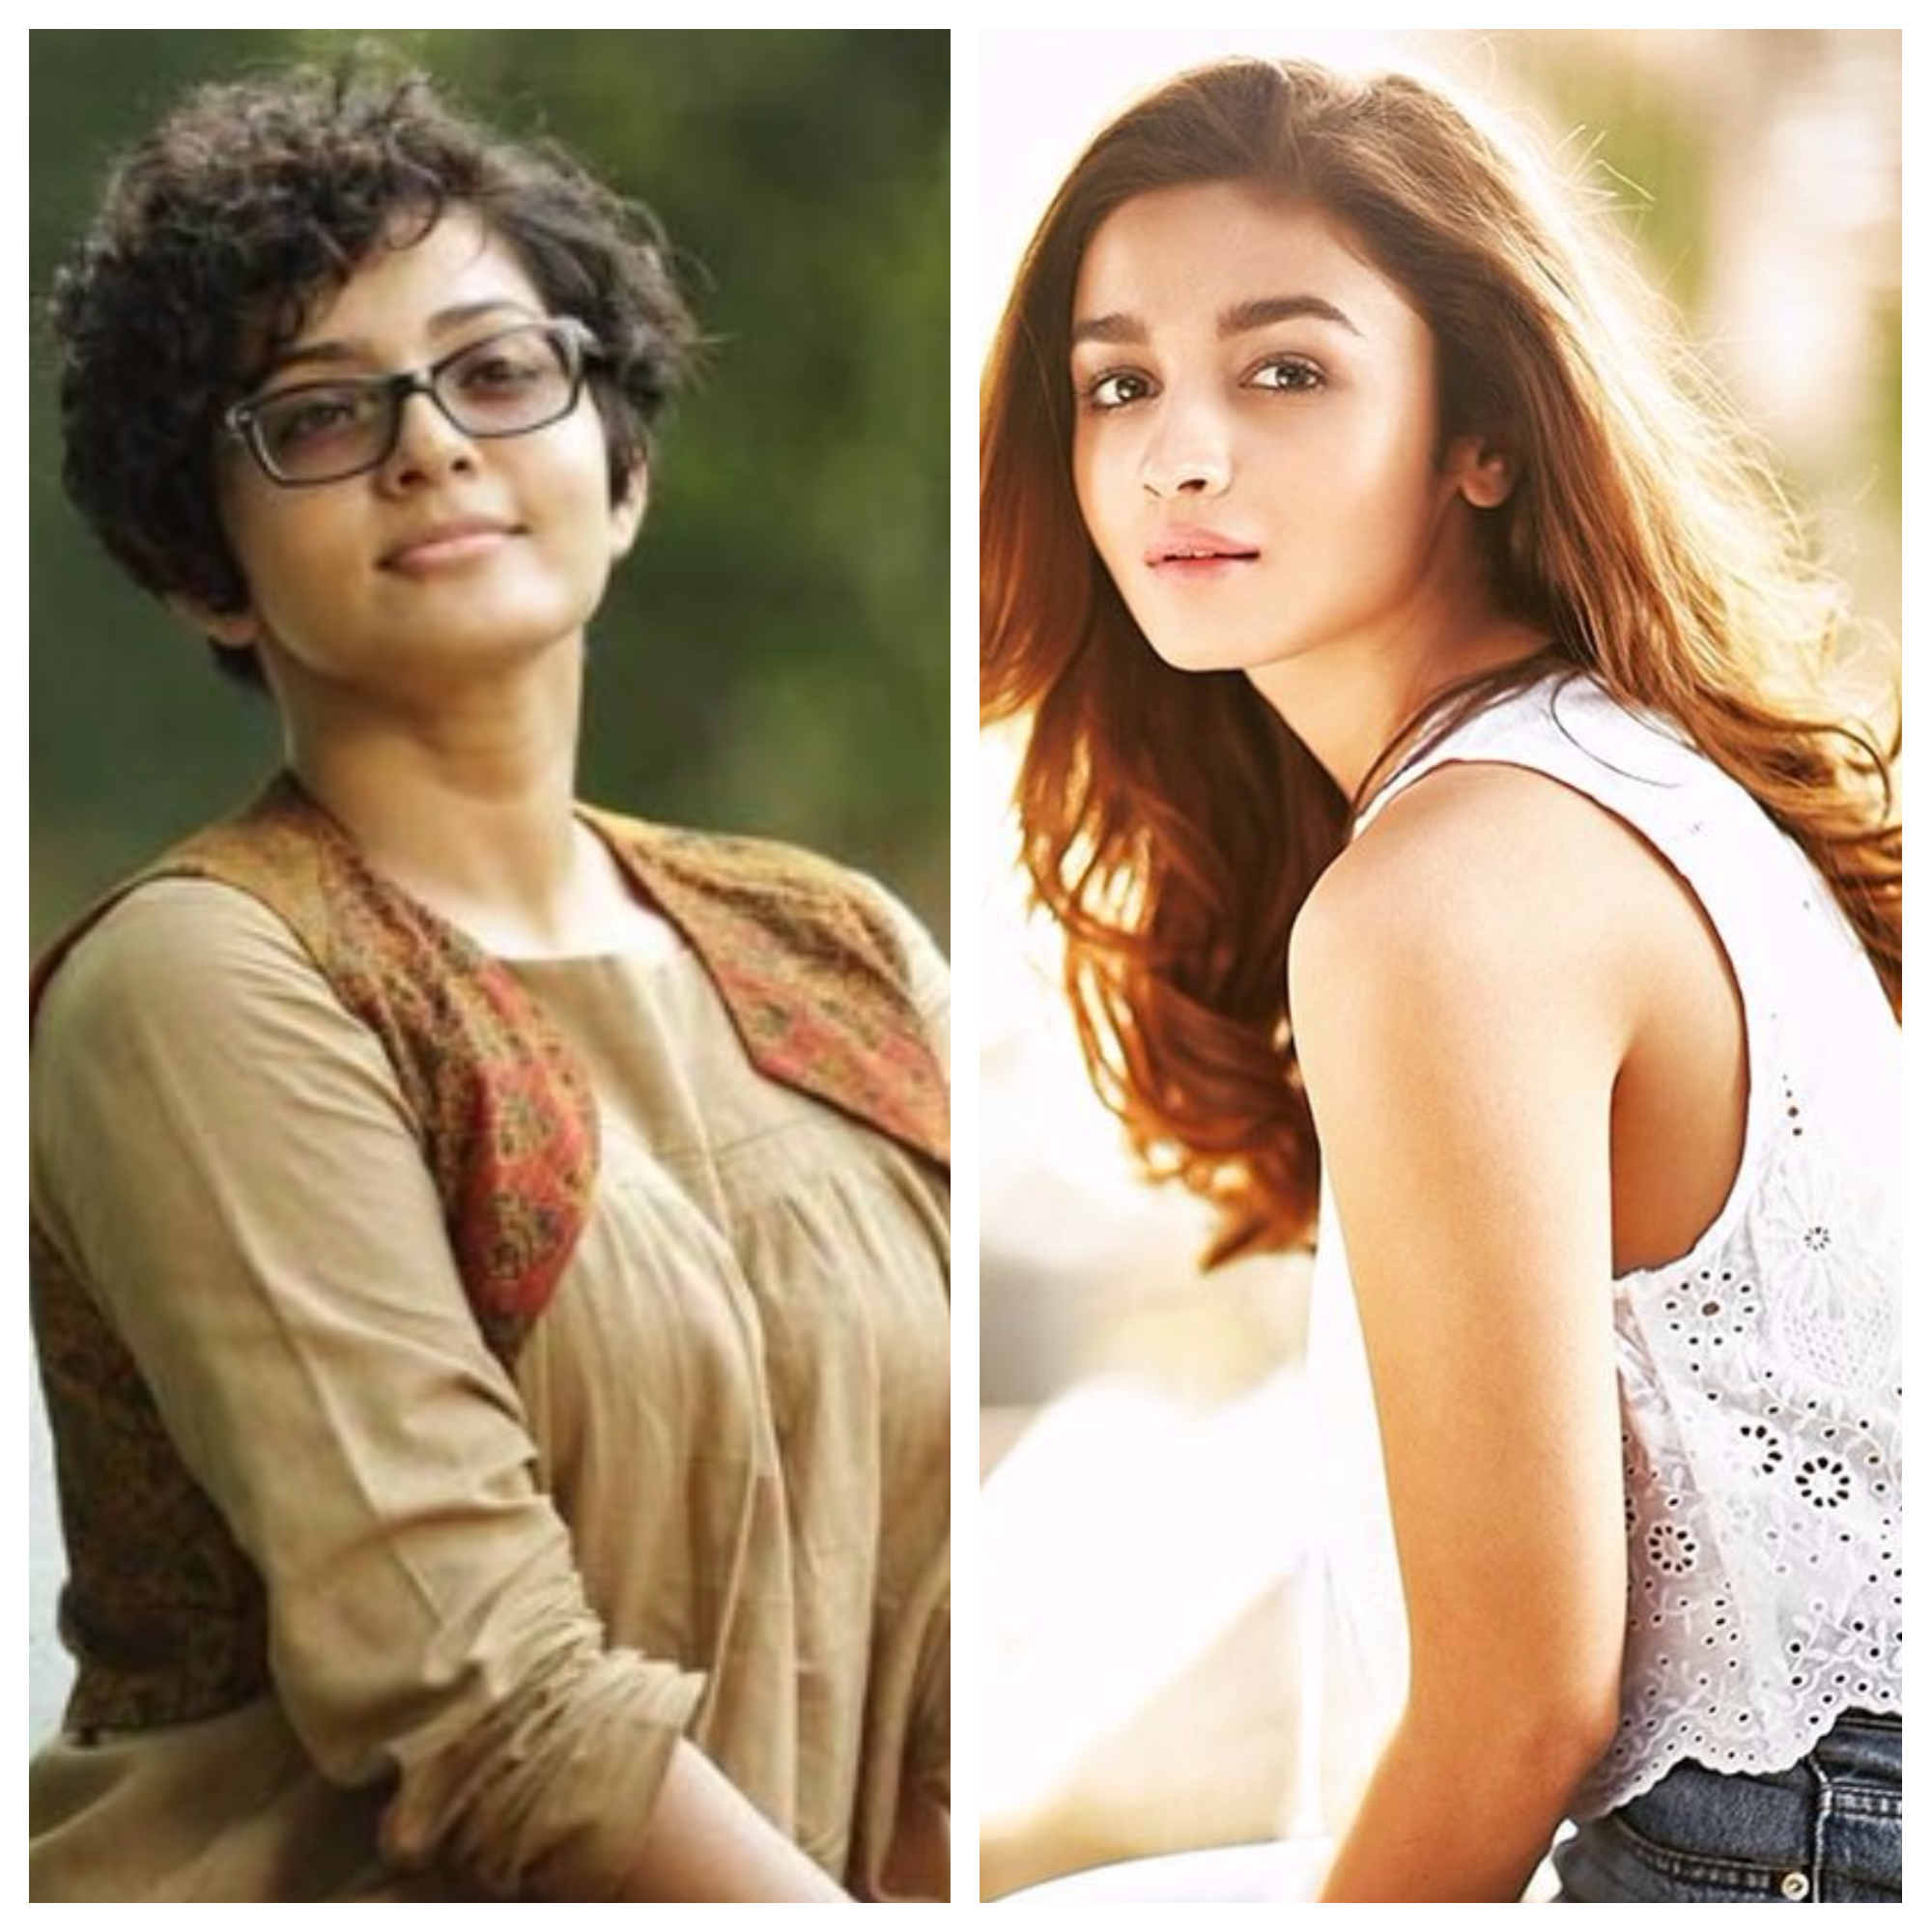 EXCLUSIVE: Parvathy wants Alia Bhatt to play her character in the Bollywood remake of Bangalore Days